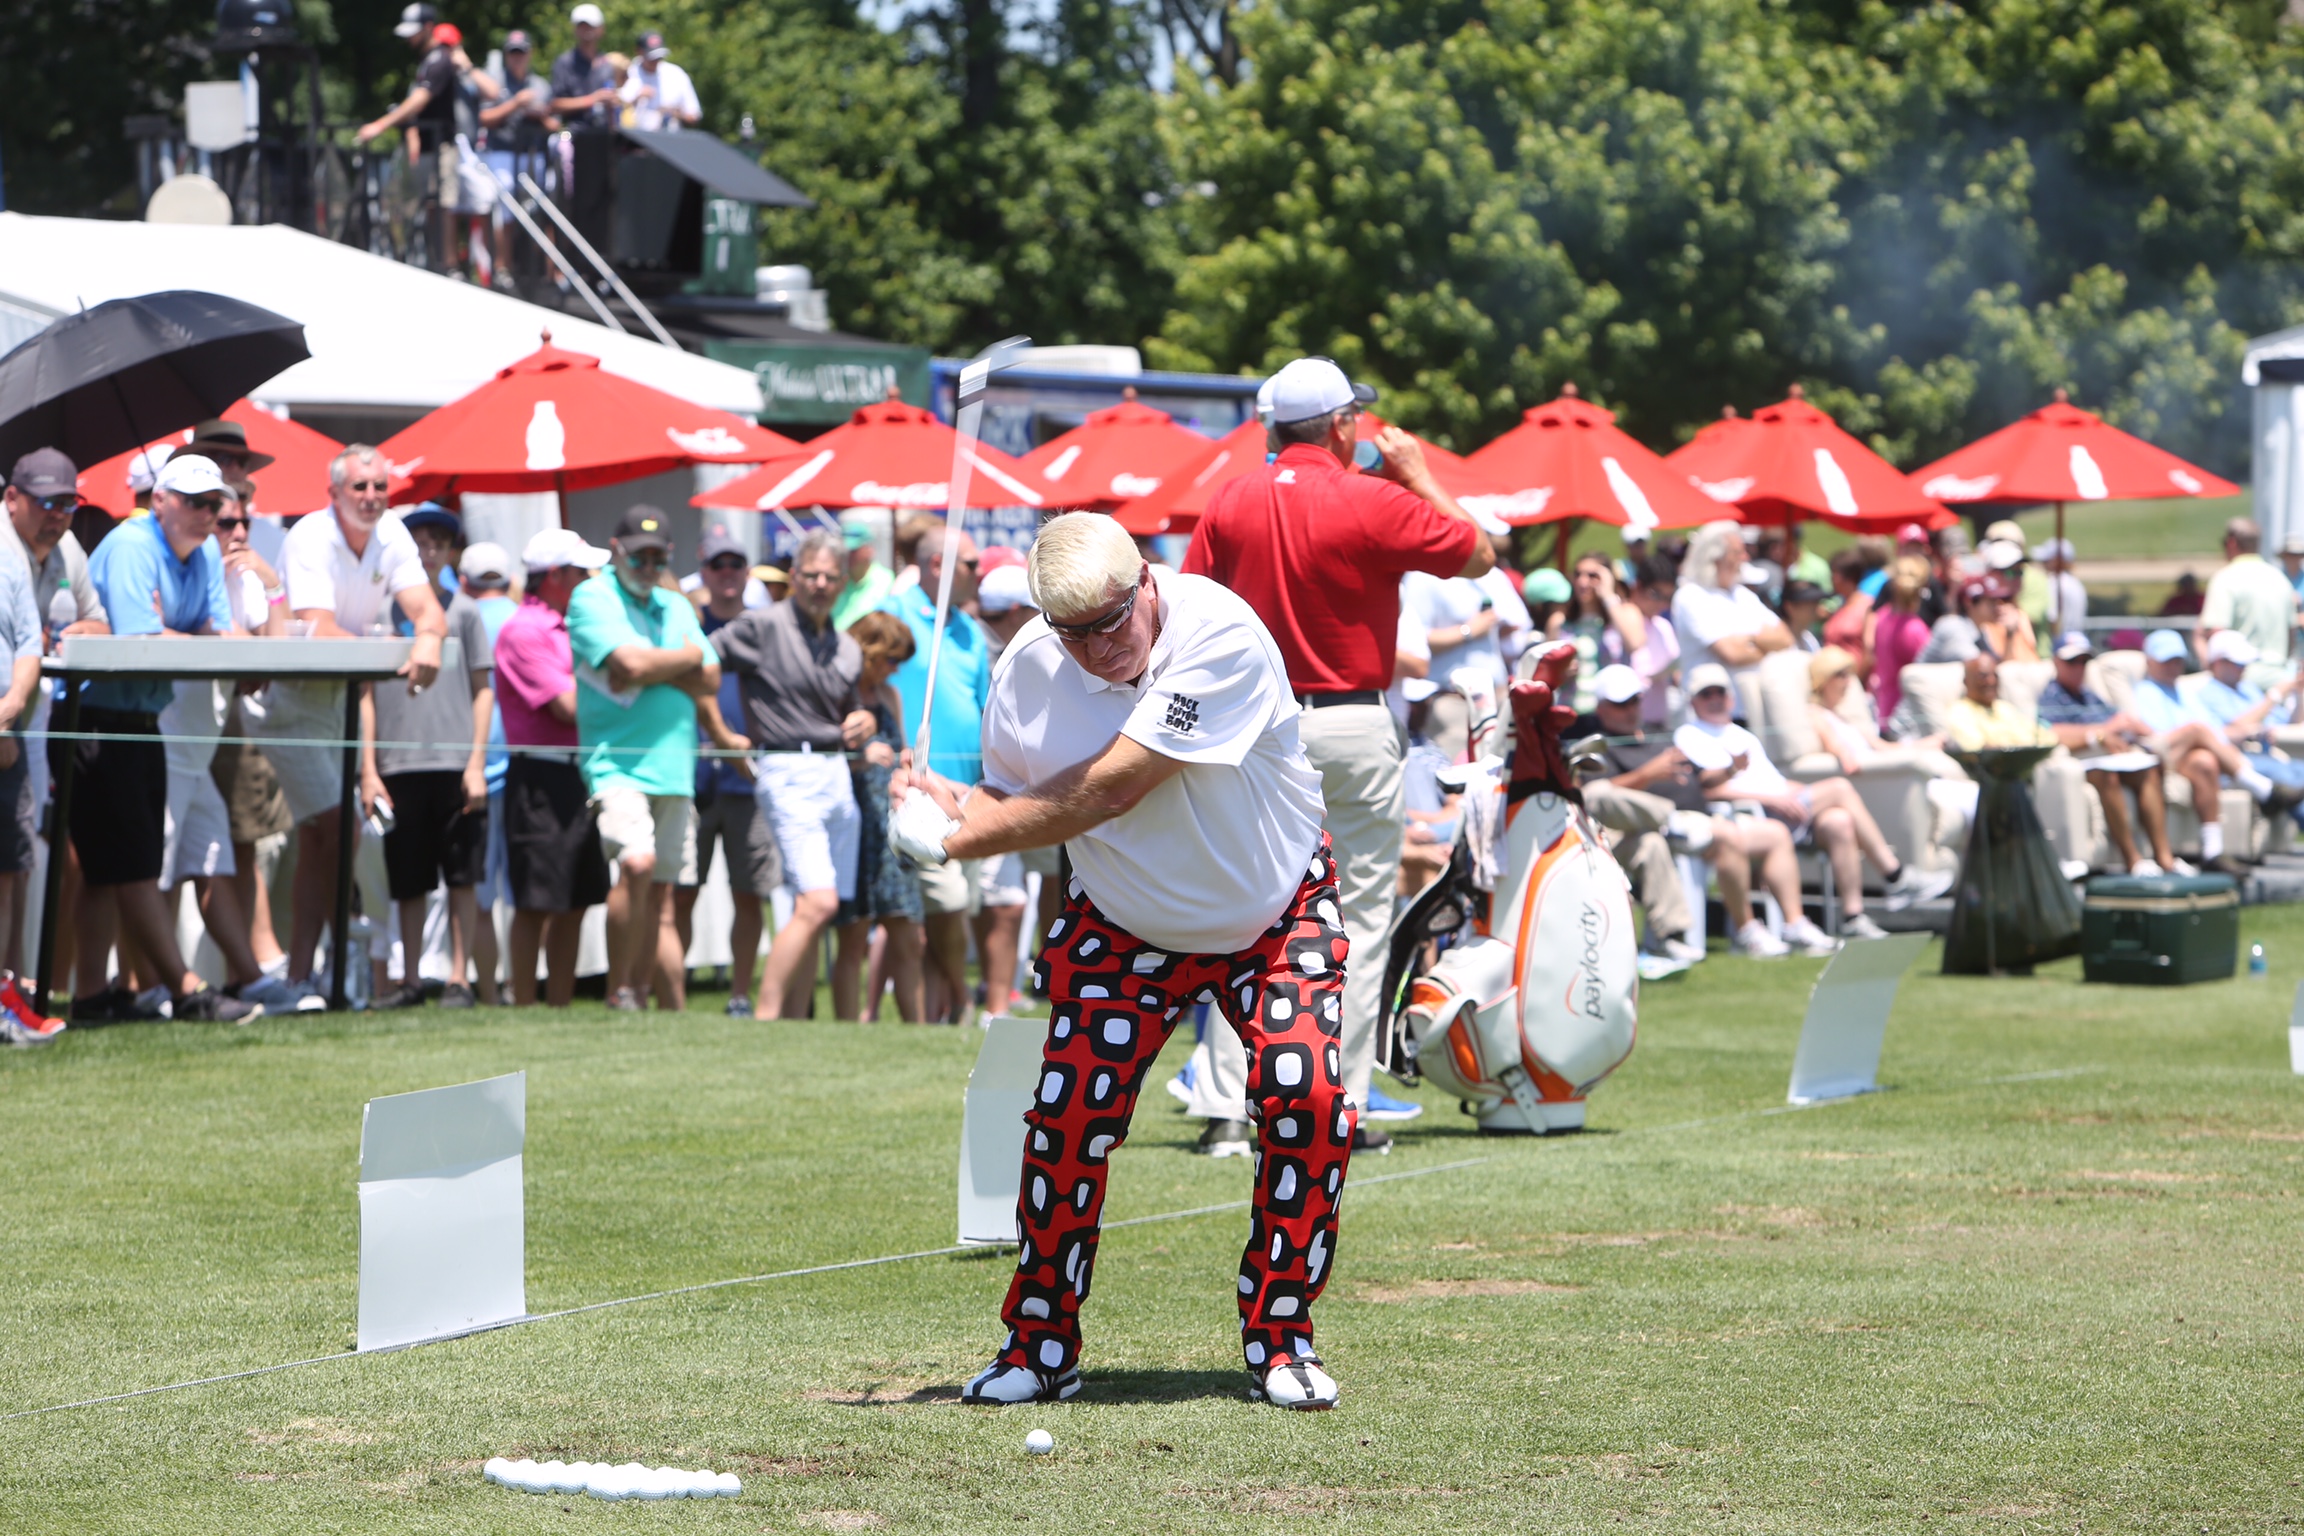 John Daly with golf club at Regions Tradition event